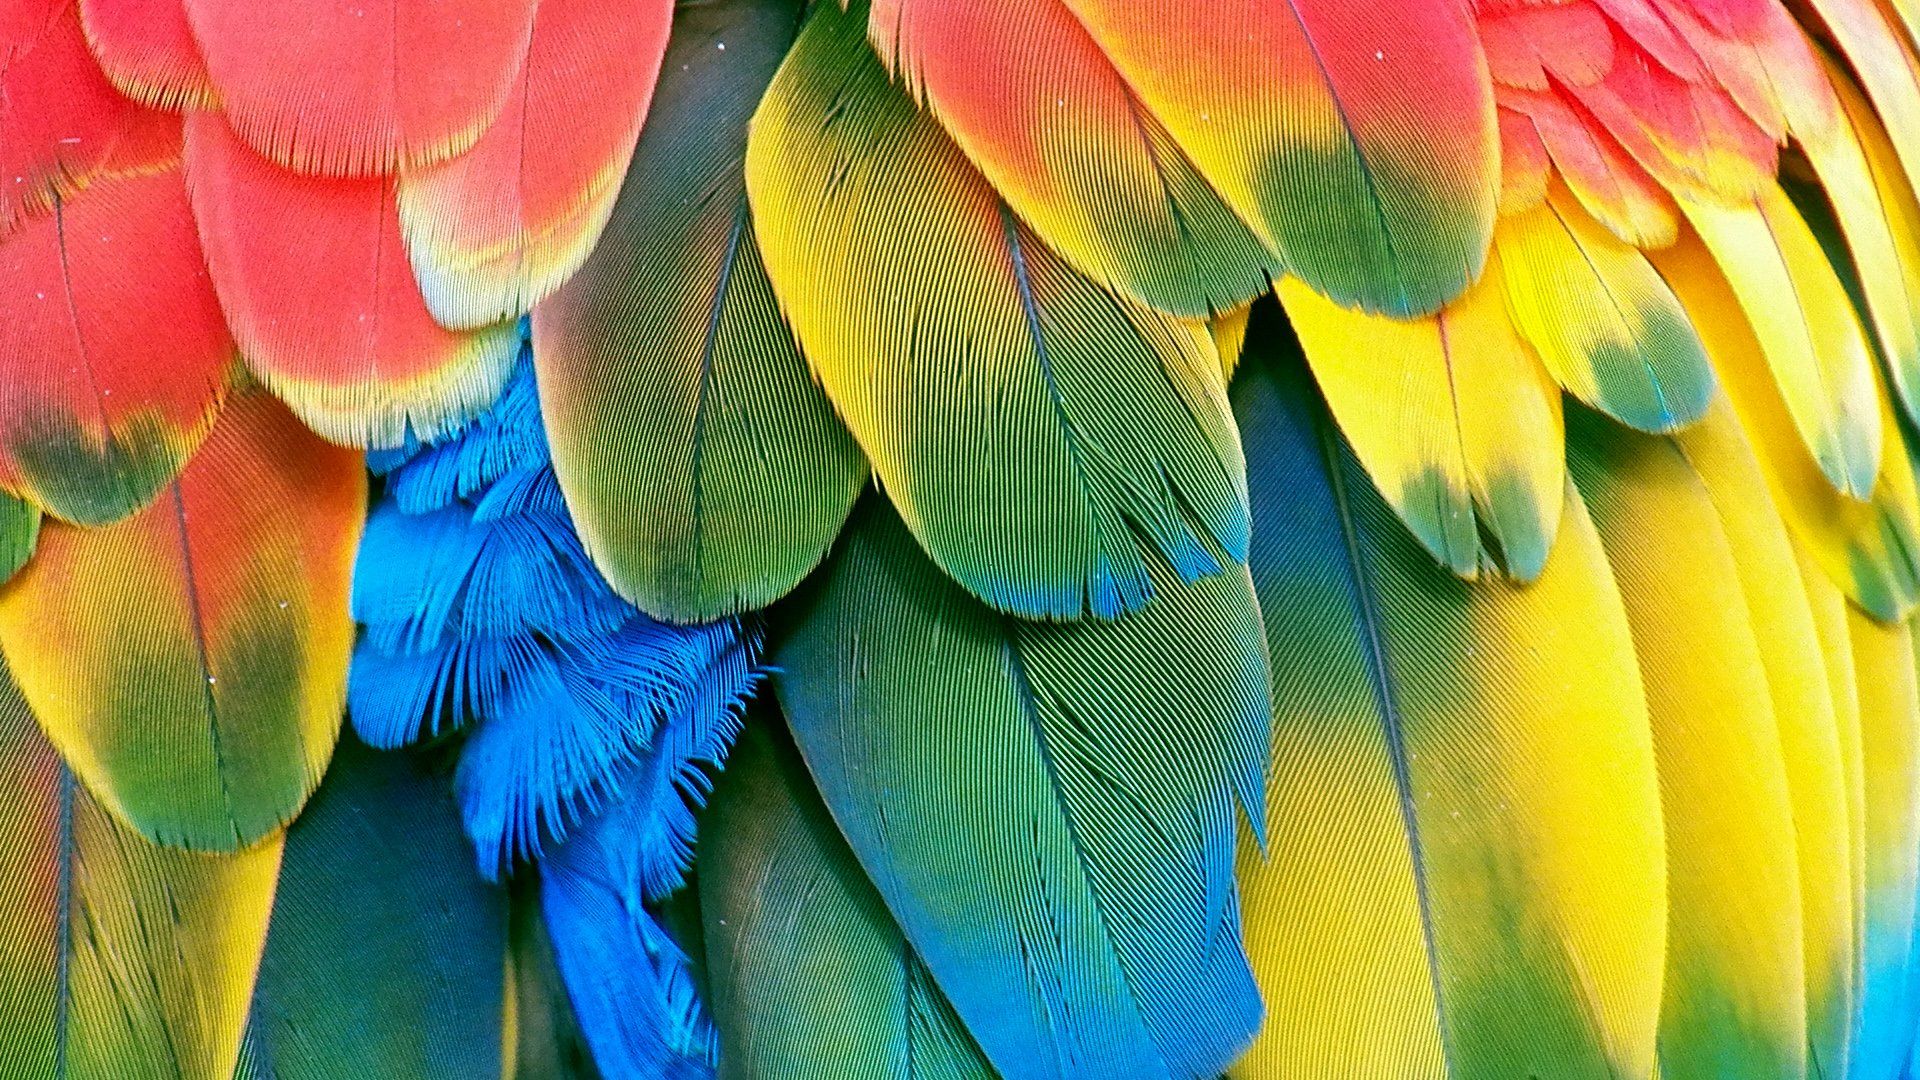 Bird Feather Wallpaper. Parrot wallpaper, Finding feathers, Macaw feathers